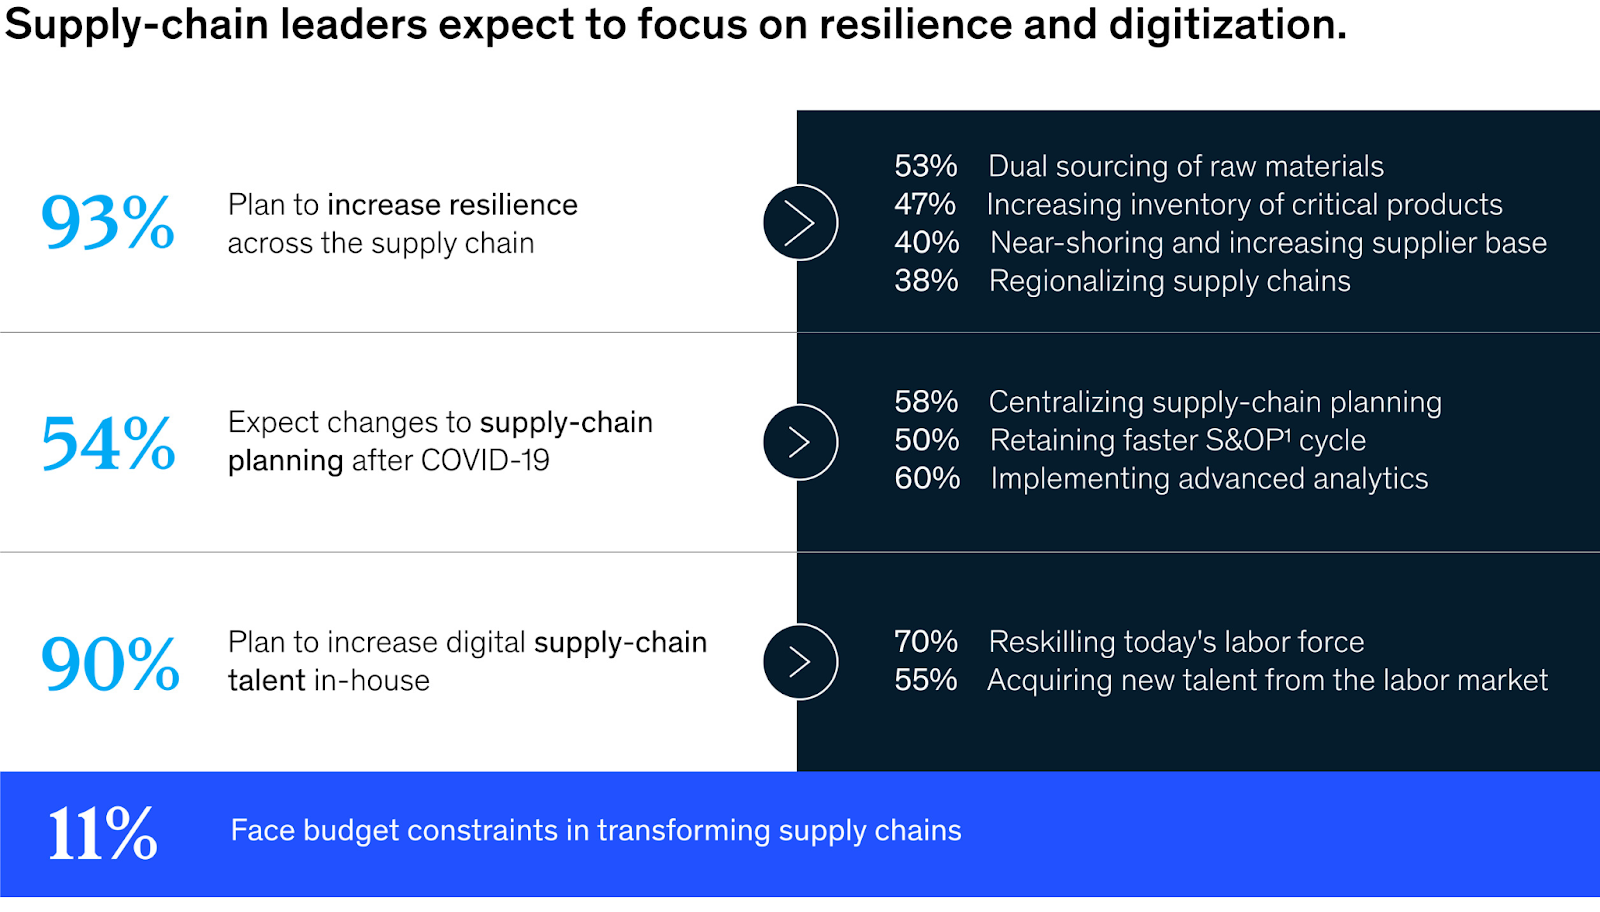 An illustration that shows that supply chain managers will focus more on resilience and digitization post-pandemic.